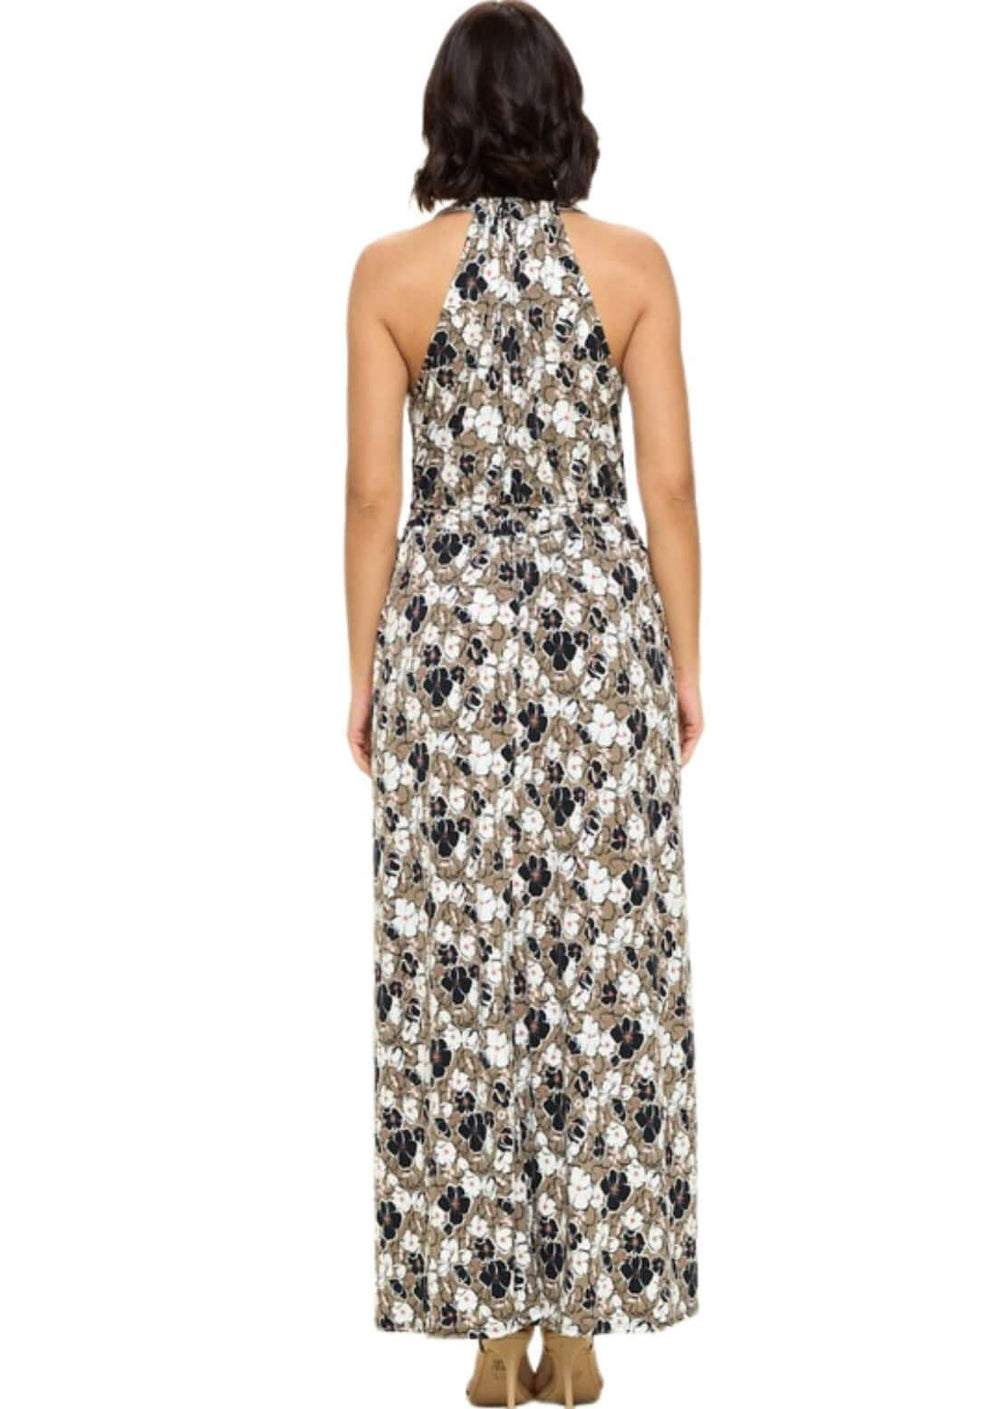 USA Made Ladies Floral Printed Halter Maxi Dress in Taupe with Black, White & Pink Floral Design | Classy Cozy Cool Women's Made in America Boutique